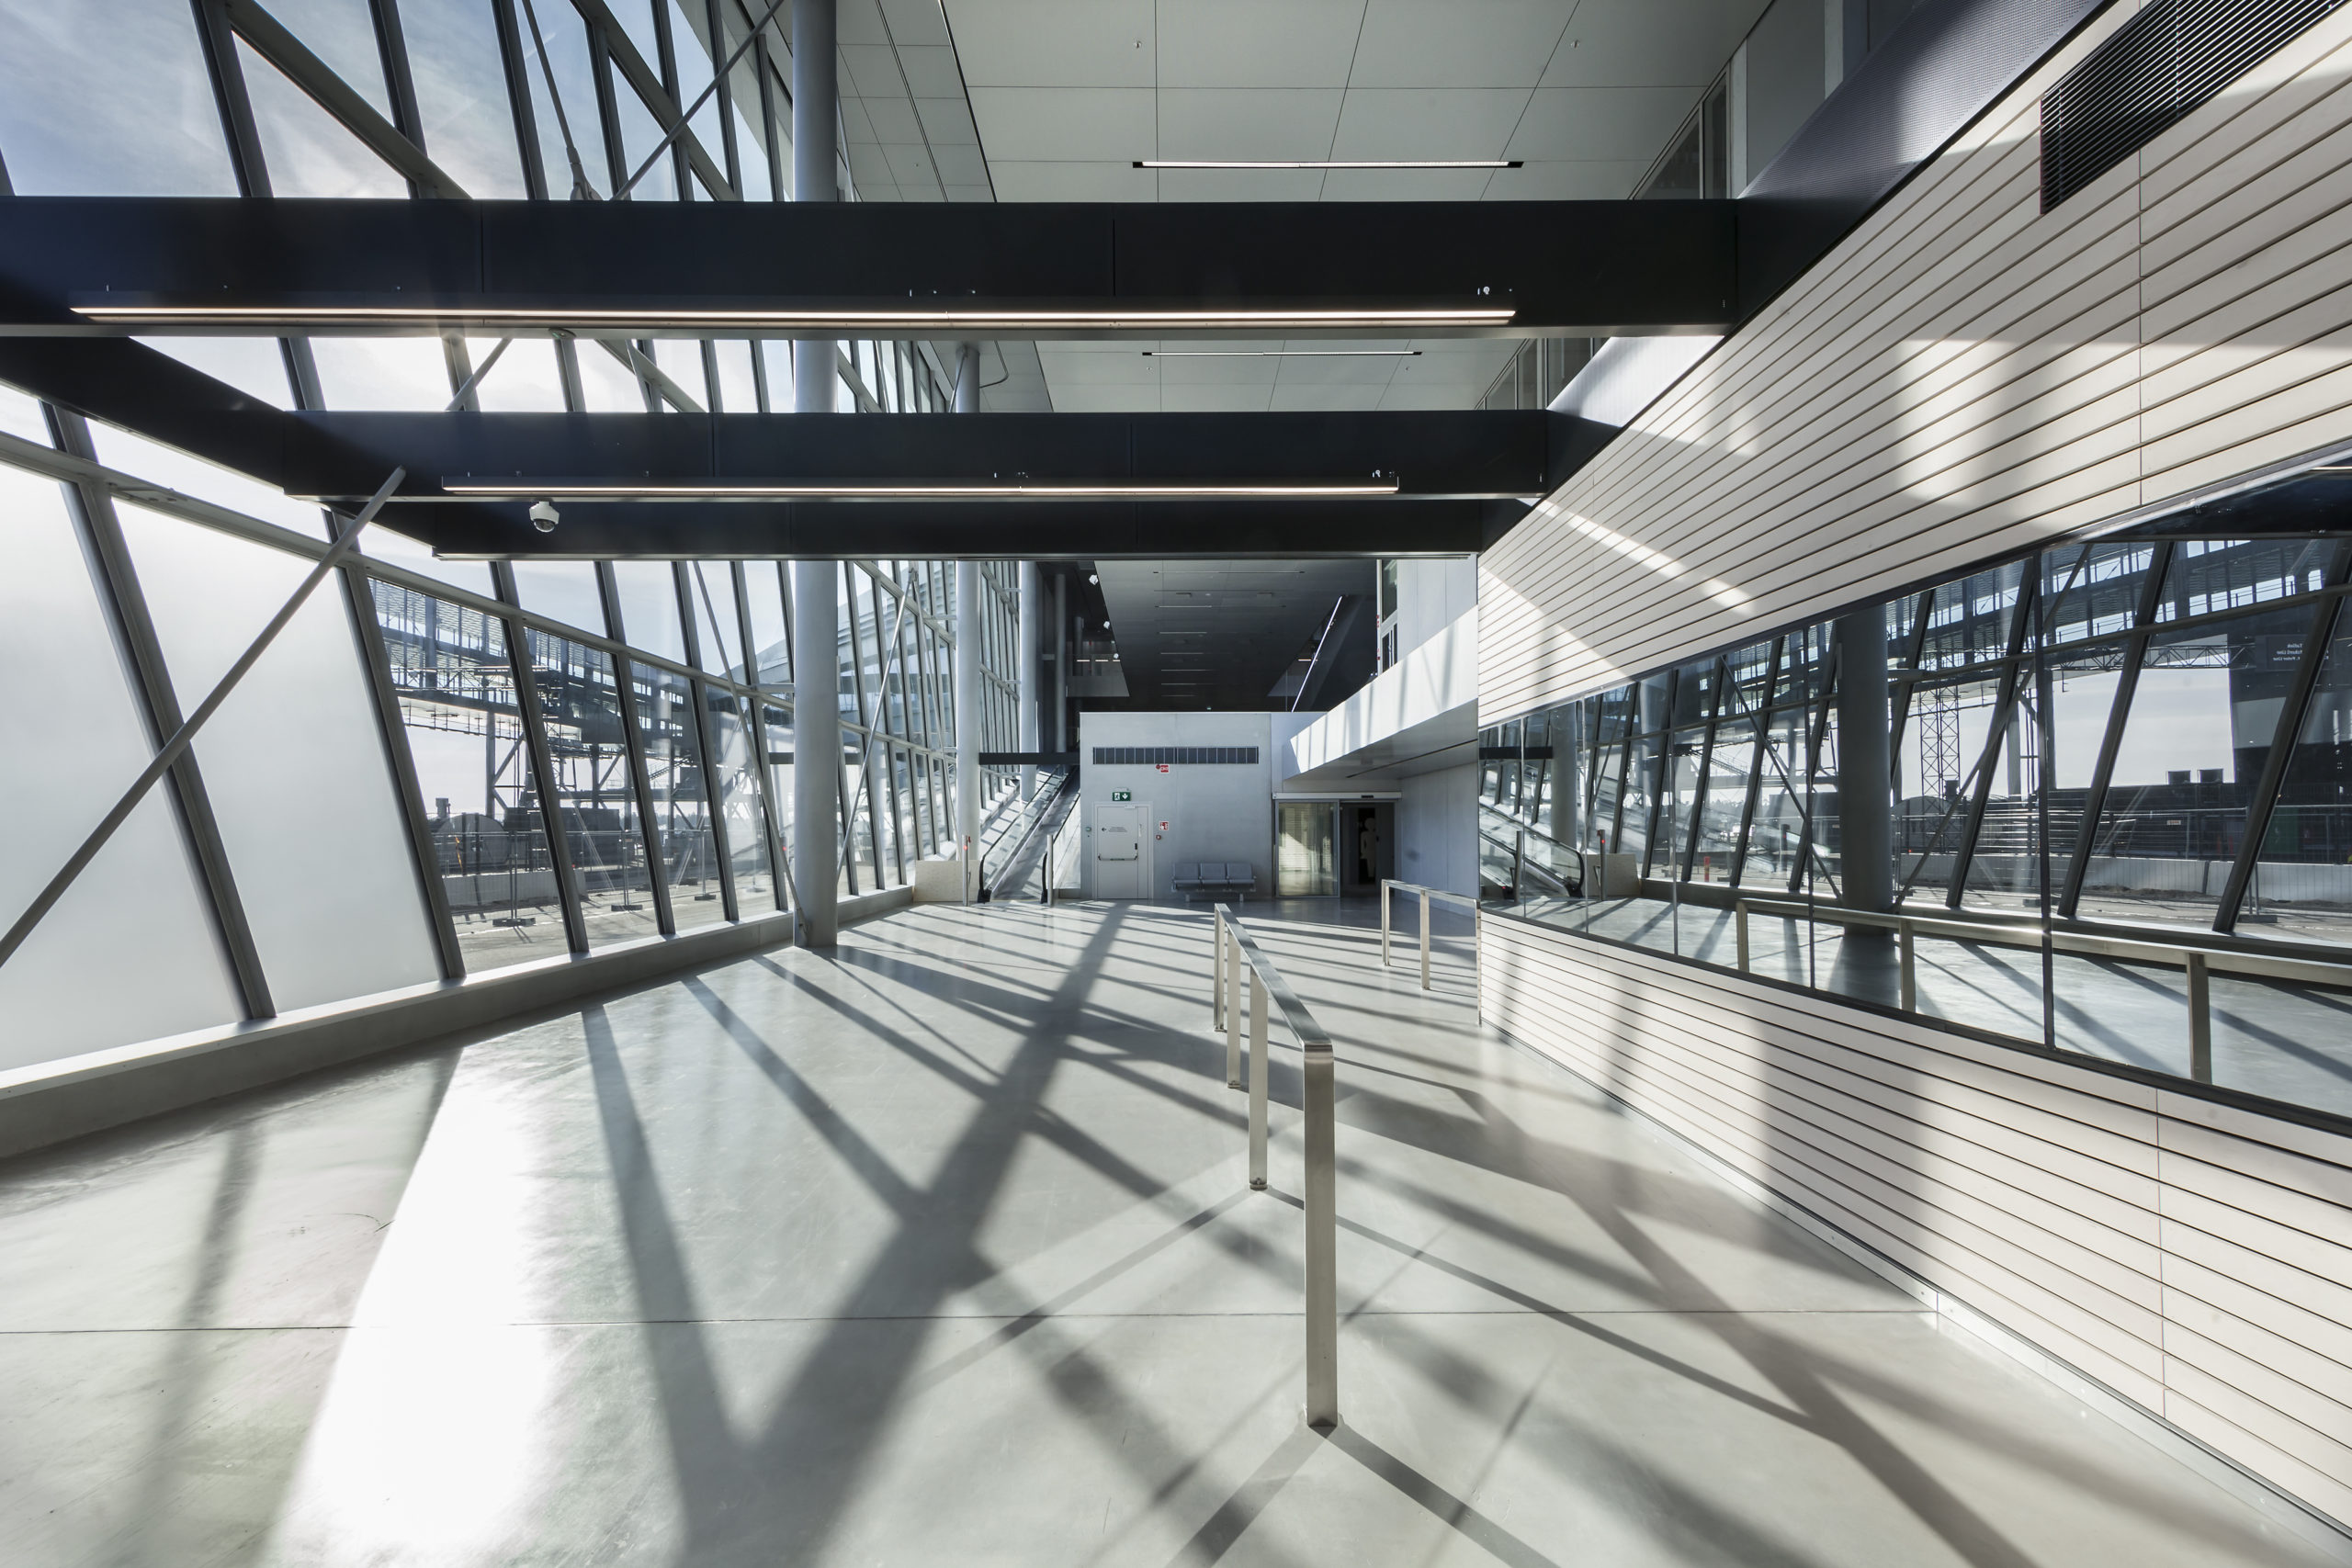 transport interiors West Terminal 2 by PES-Architects, Helsinki, Finland